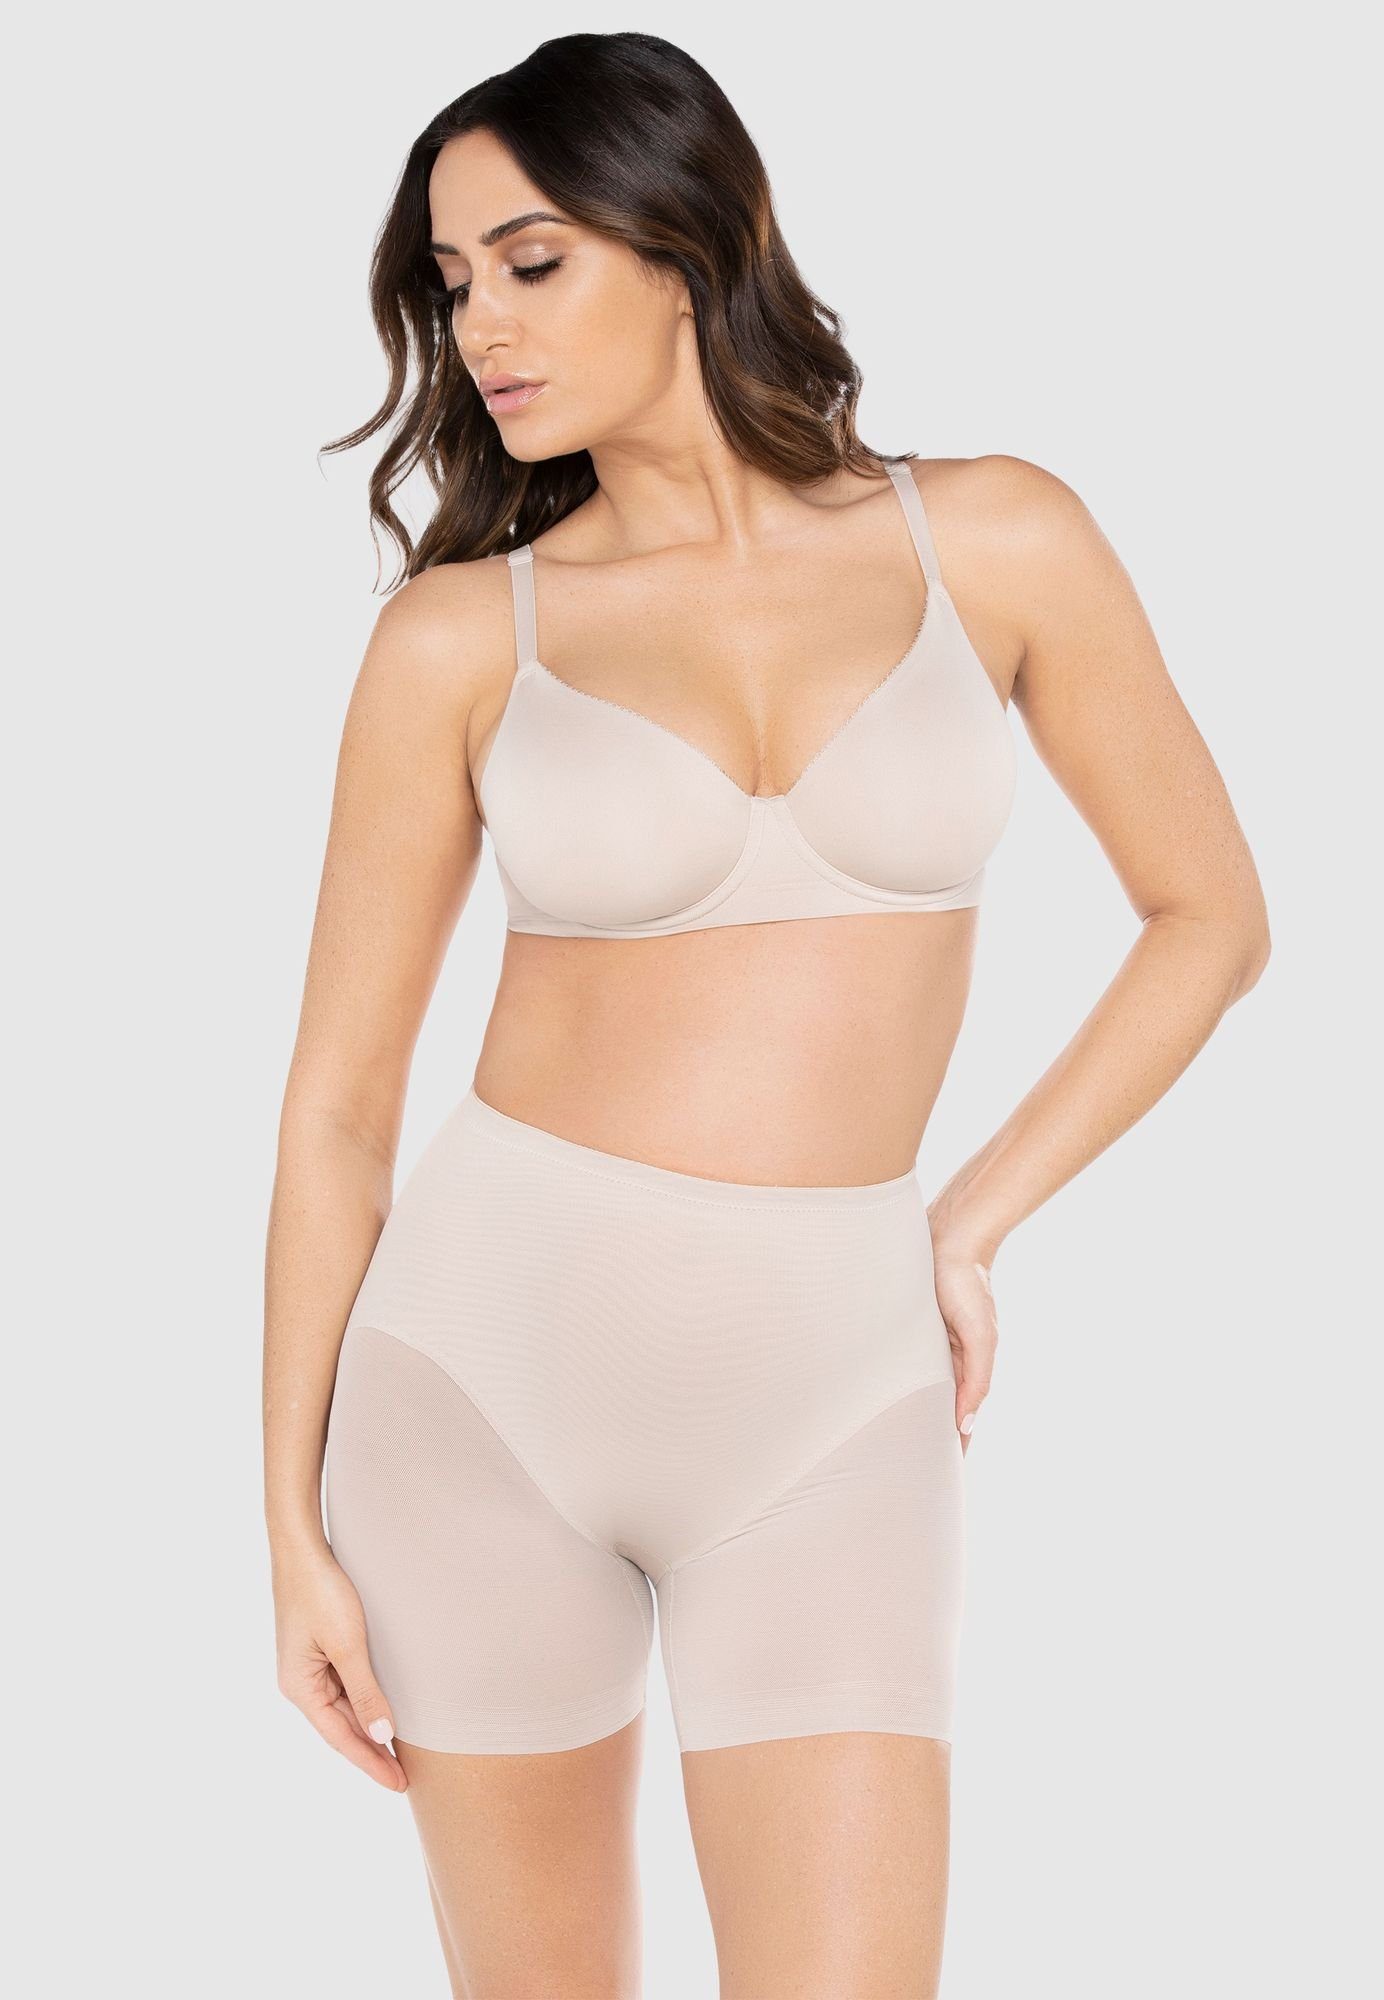 Miraclesuit Shapinghose 2776 Haut (SK)